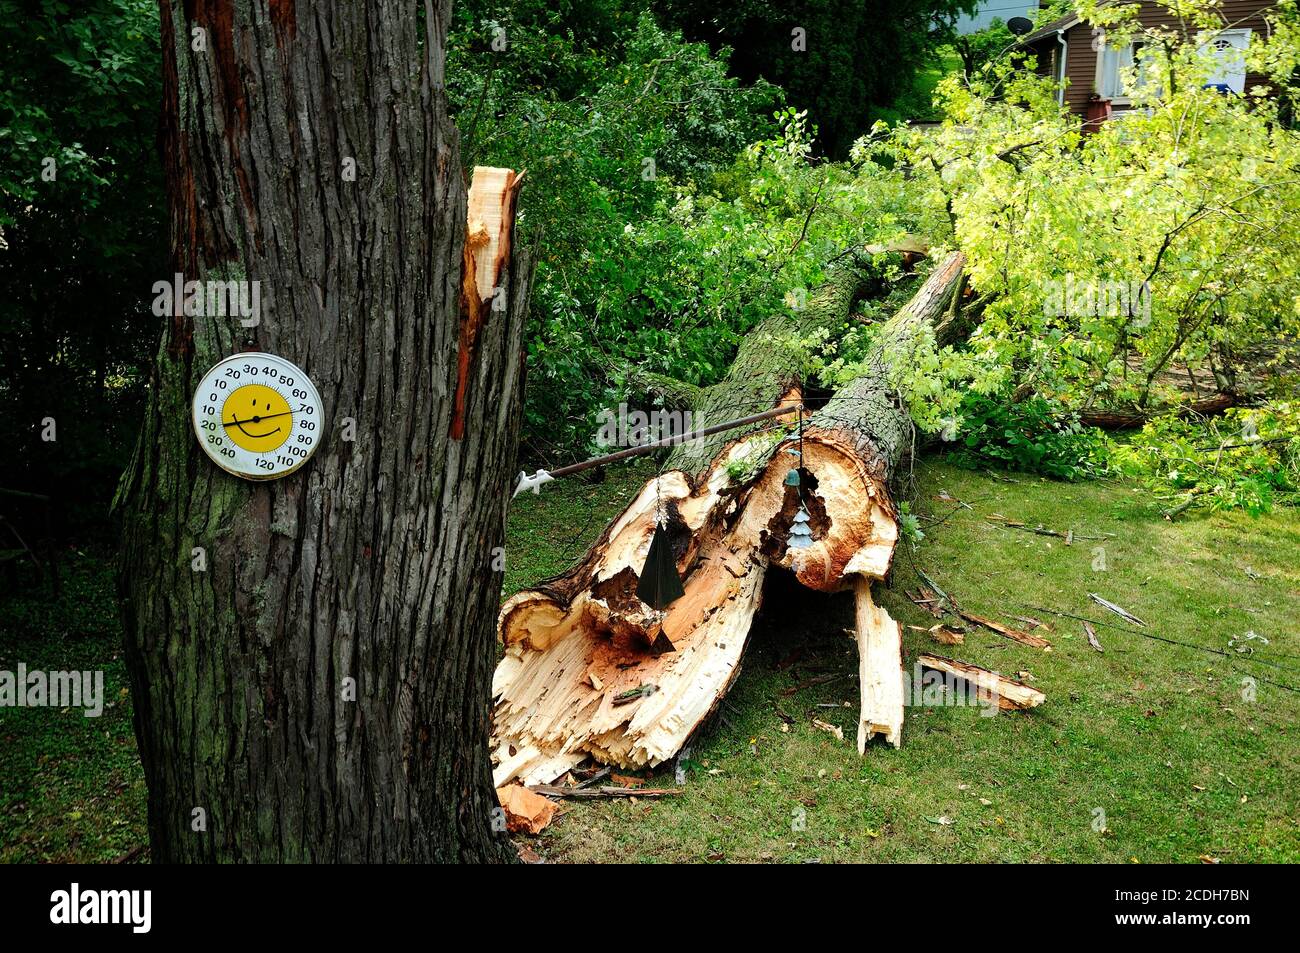 Giant maple tree downed by wind storm next to house. Stock Photo